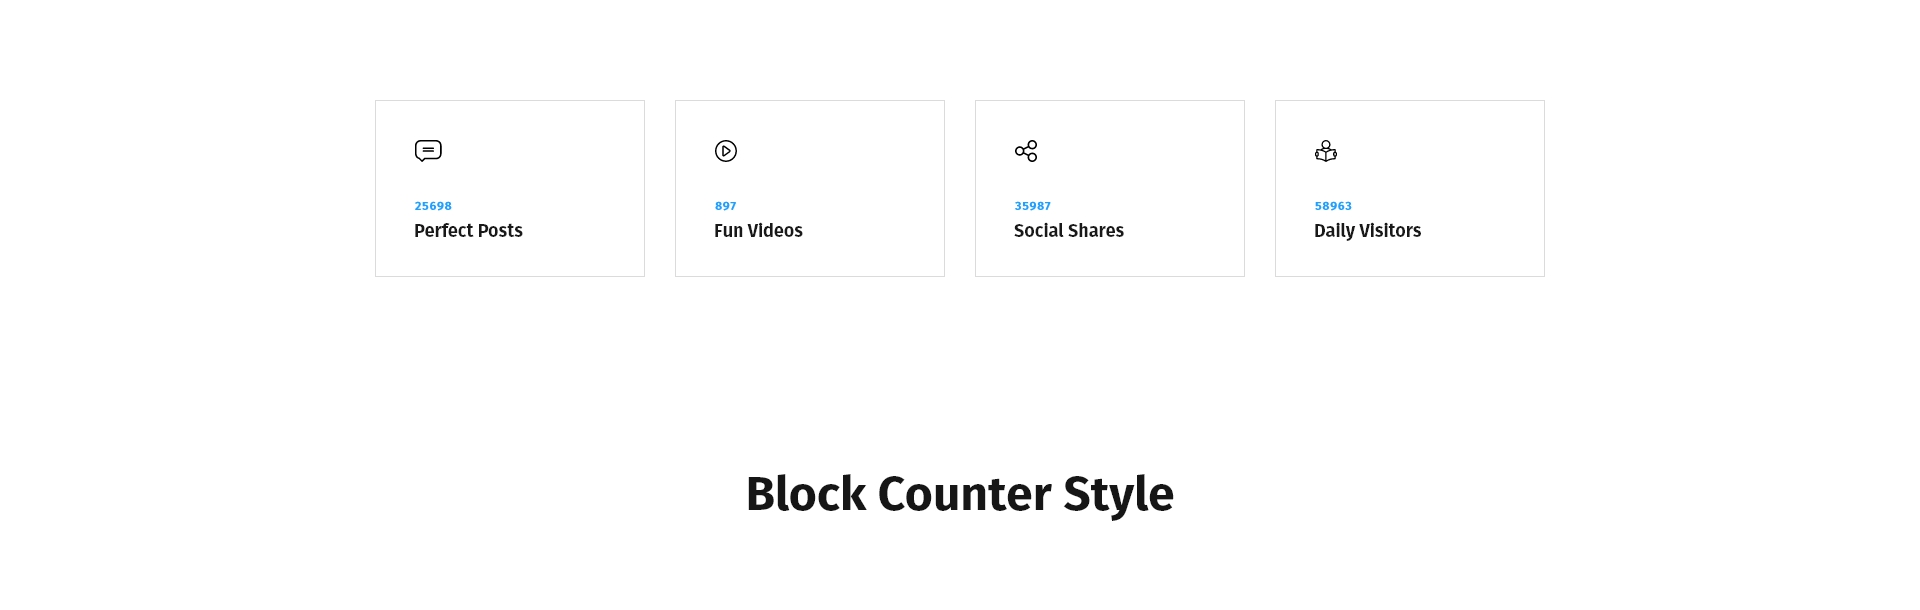 Block Counter Style